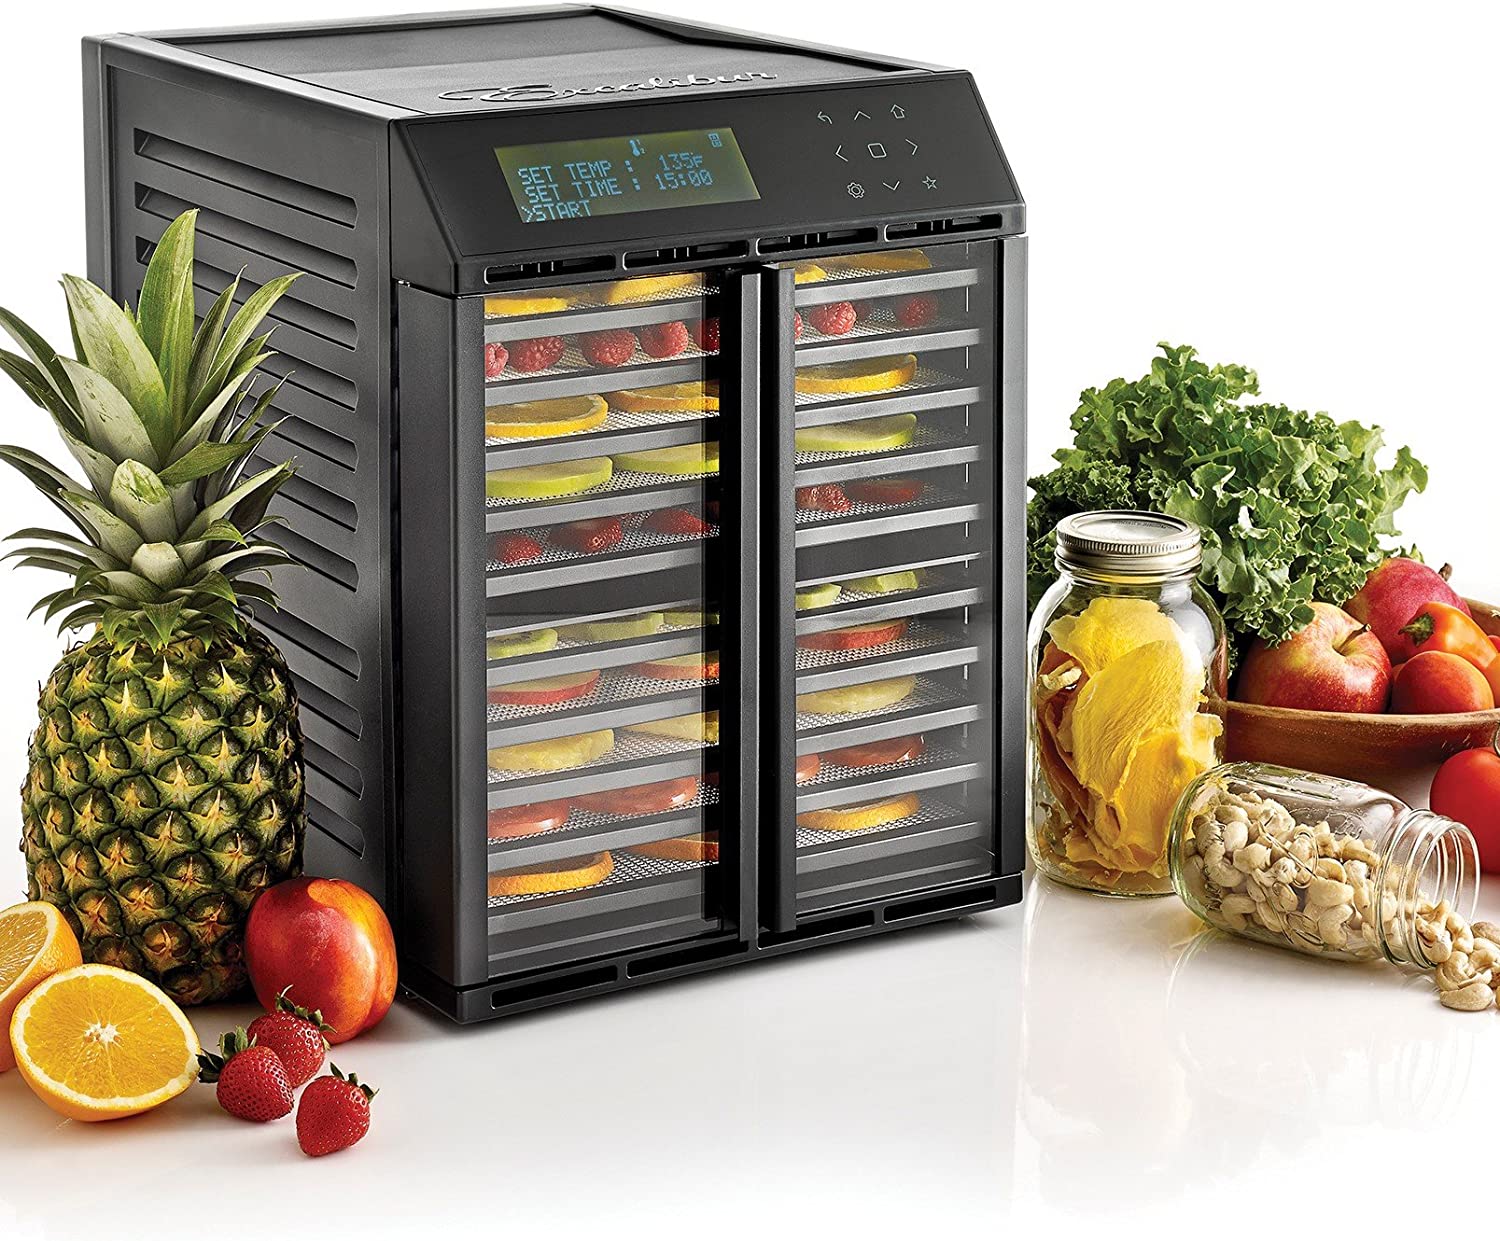 Excalibur RES10 Food Dehydrator Electric with Programmable Smart Digital Controller Features Two Drying Zones with Adjustable Time and Temperatures, Save up to 30 Recipes, 10-Tray, Black